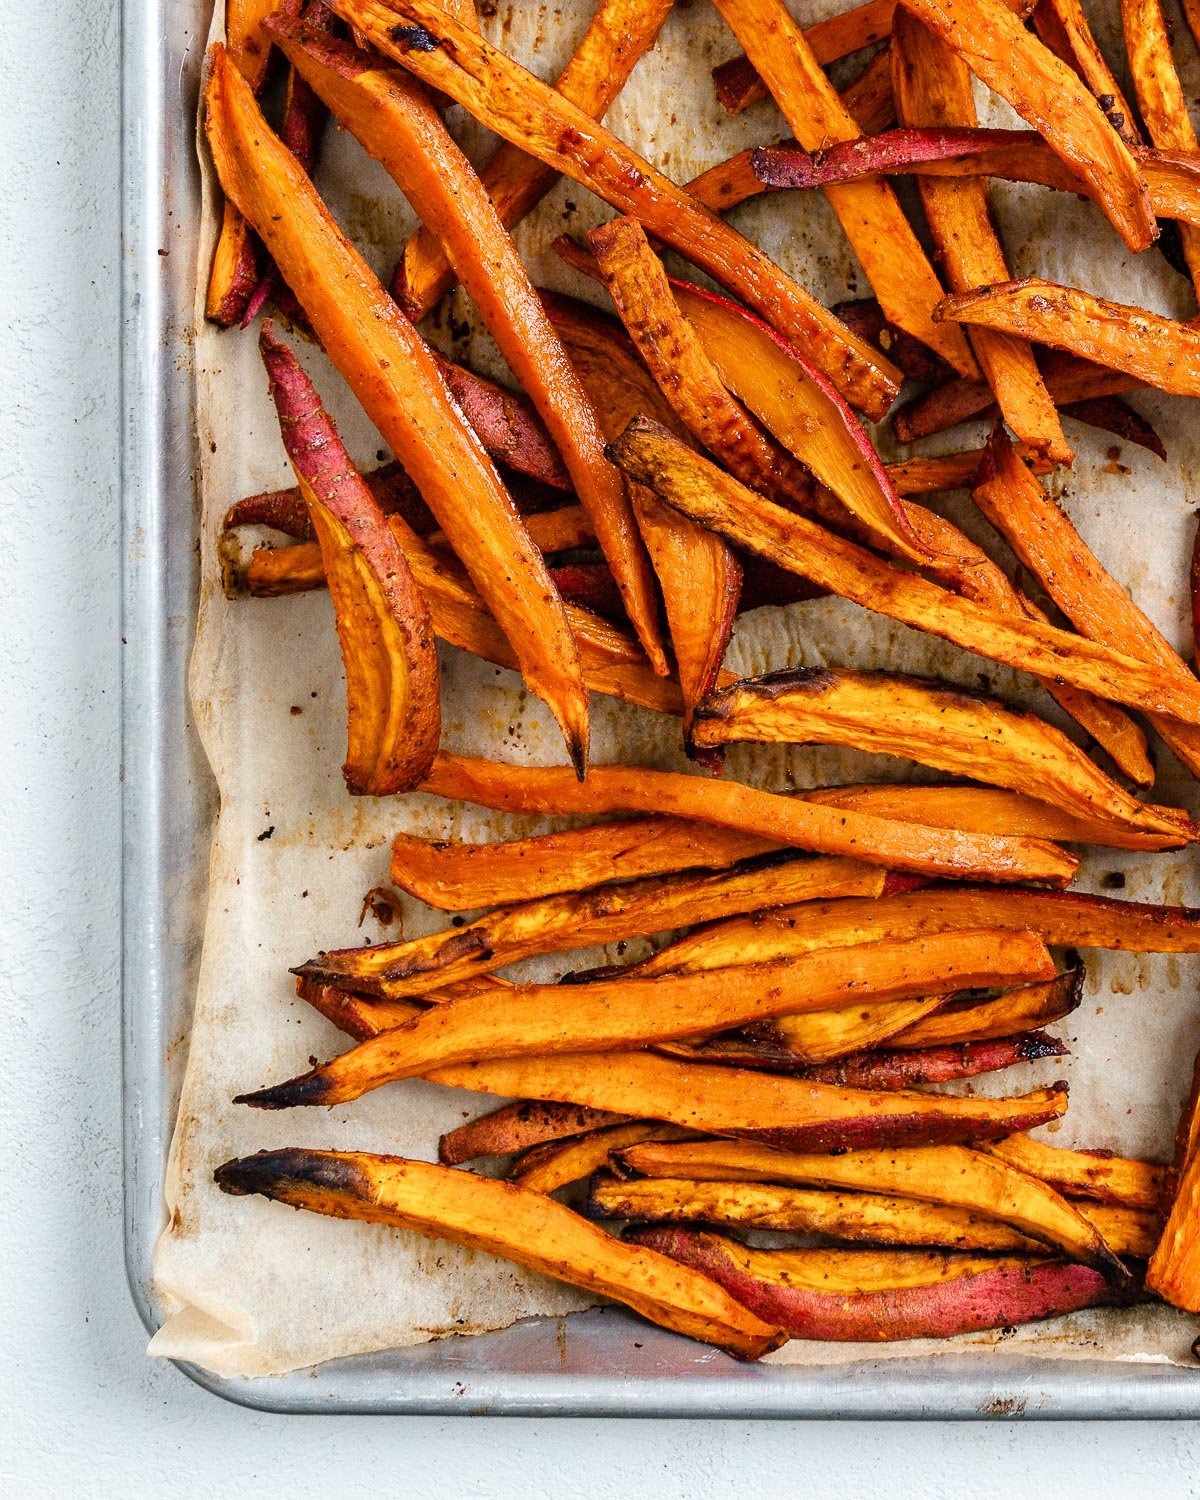 completed sweet potato fries in a baking tray